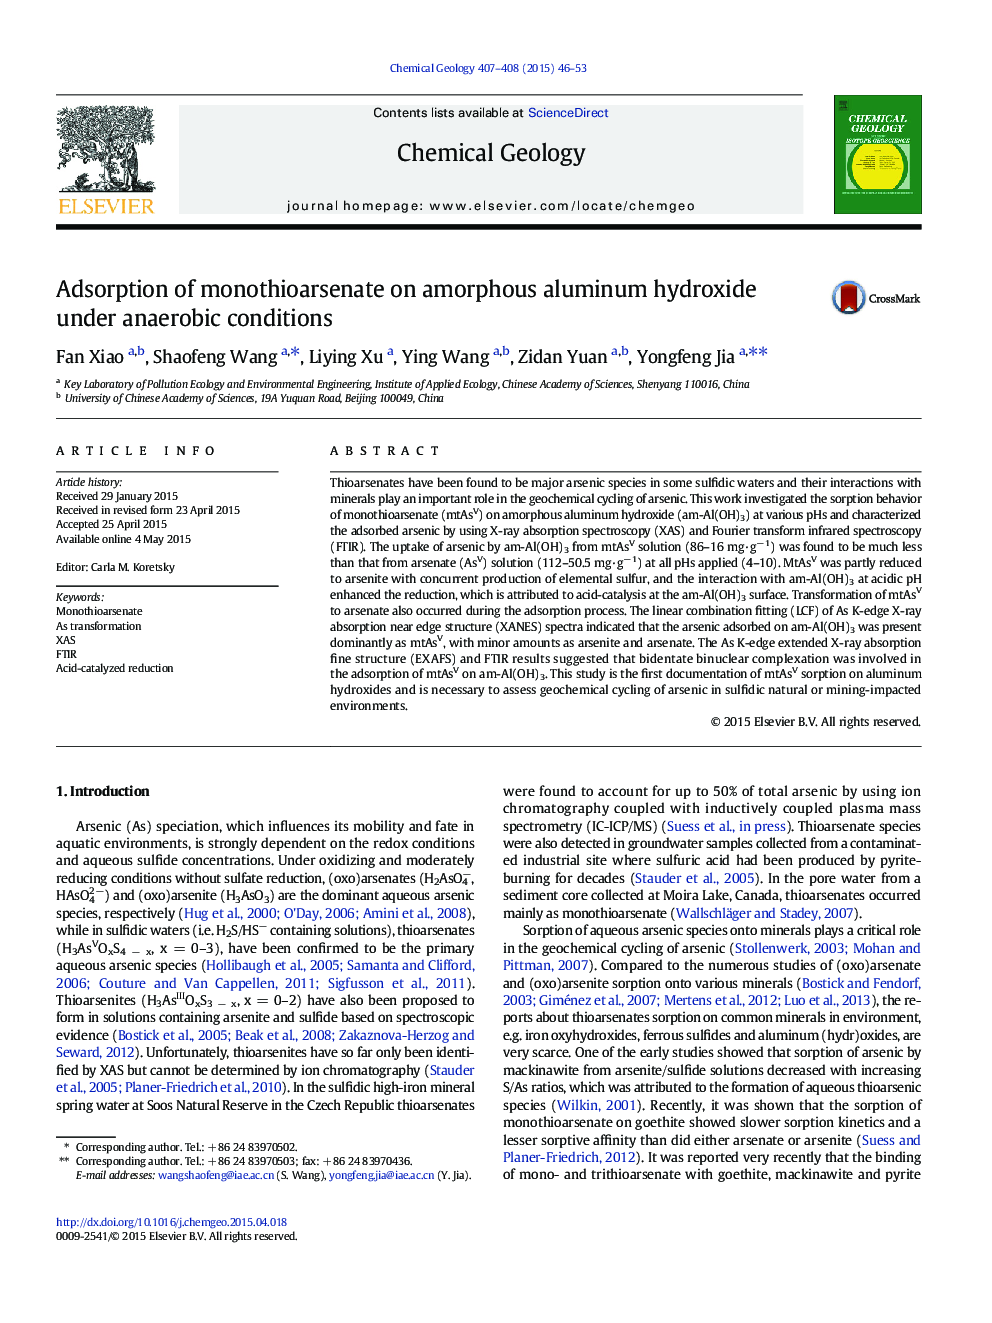 Adsorption of monothioarsenate on amorphous aluminum hydroxide under anaerobic conditions